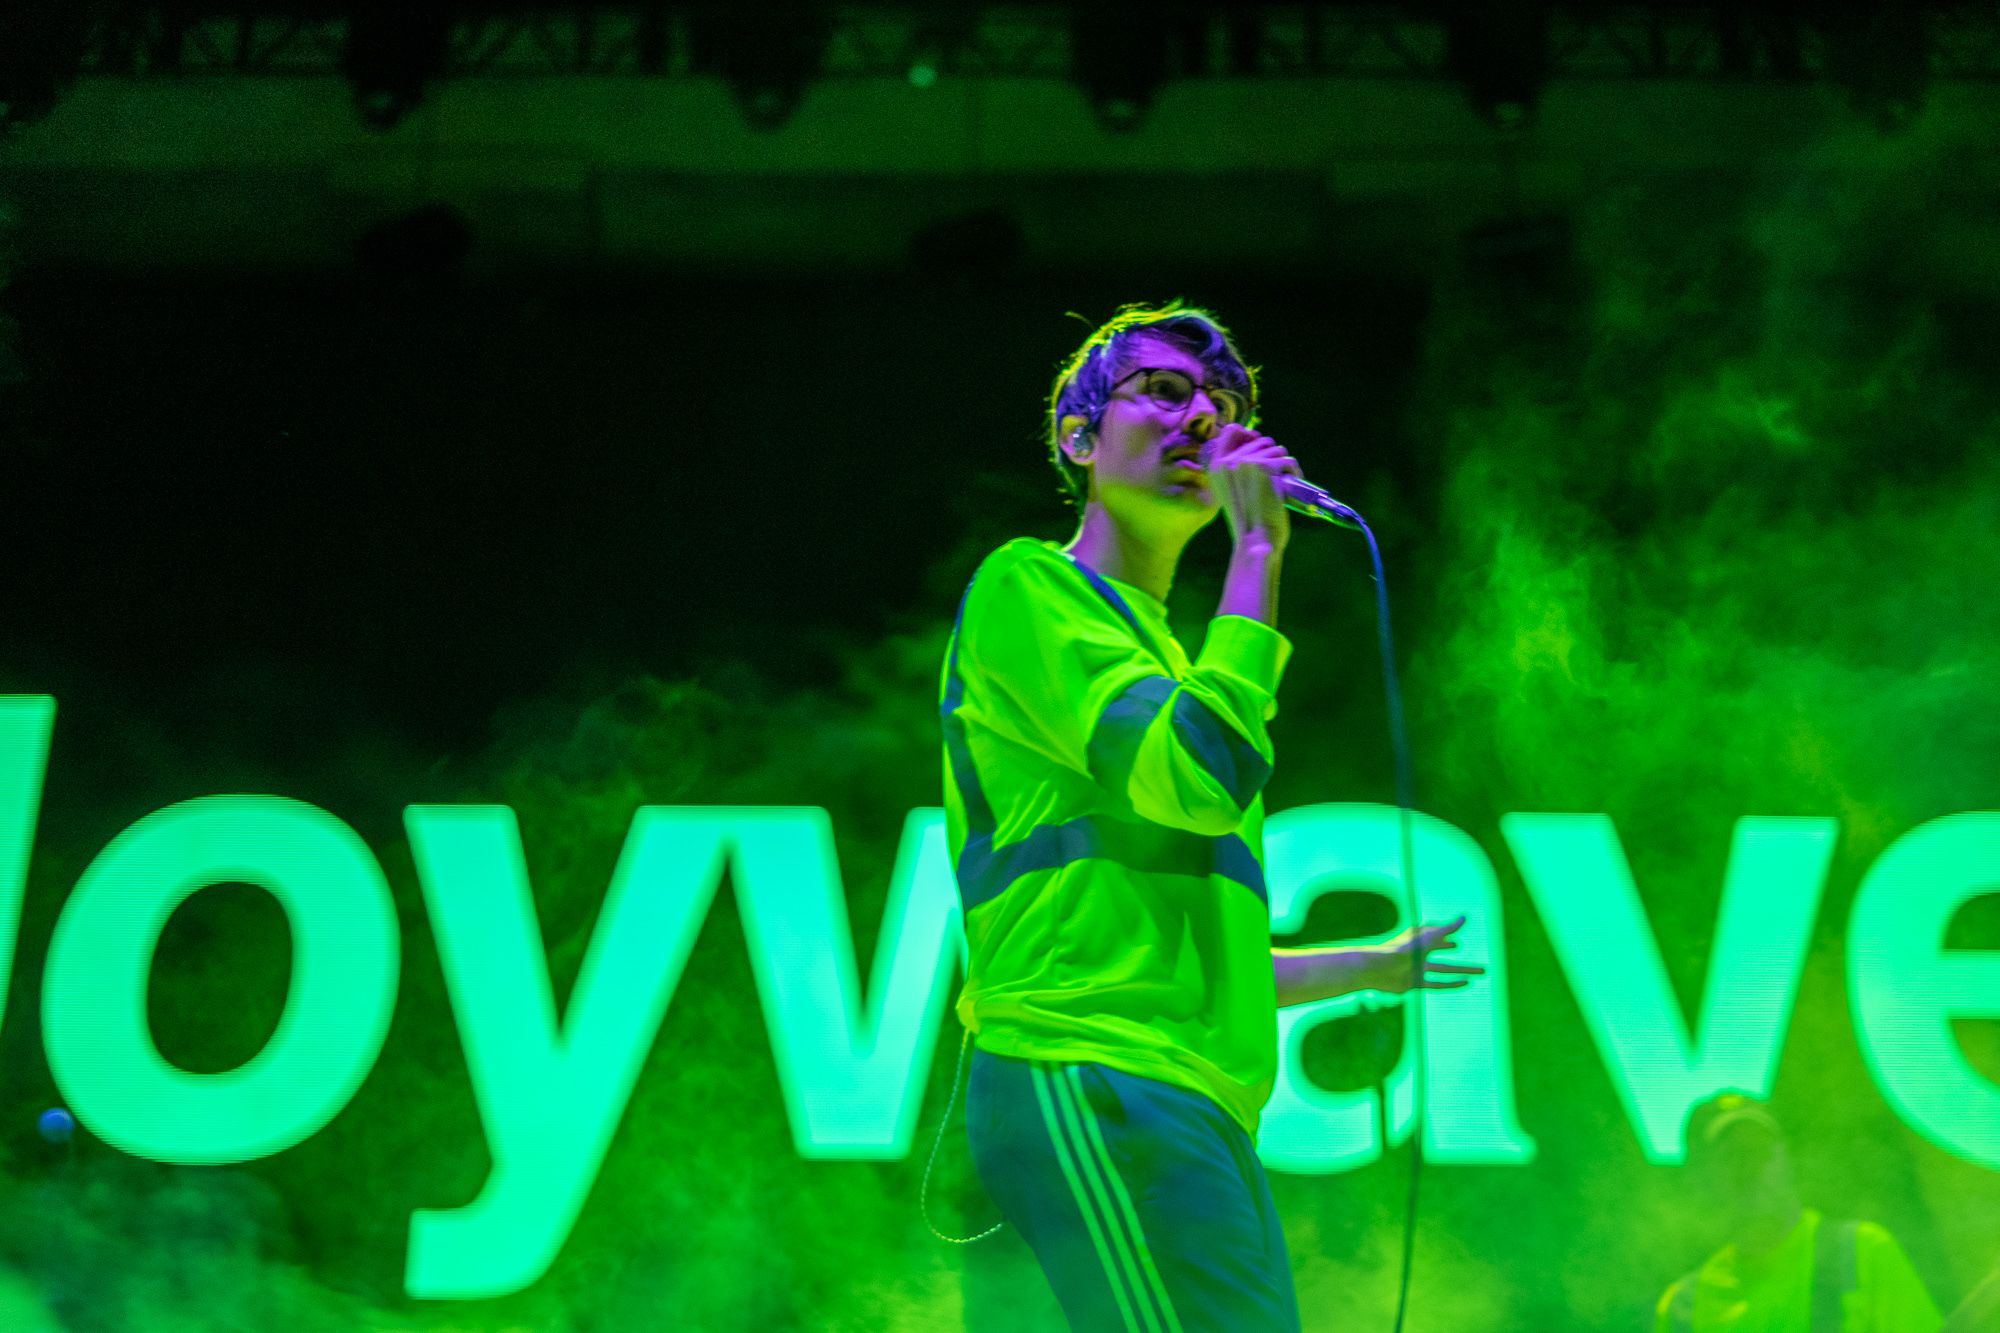 Joywave at The Greek Theatre Lost In Concert